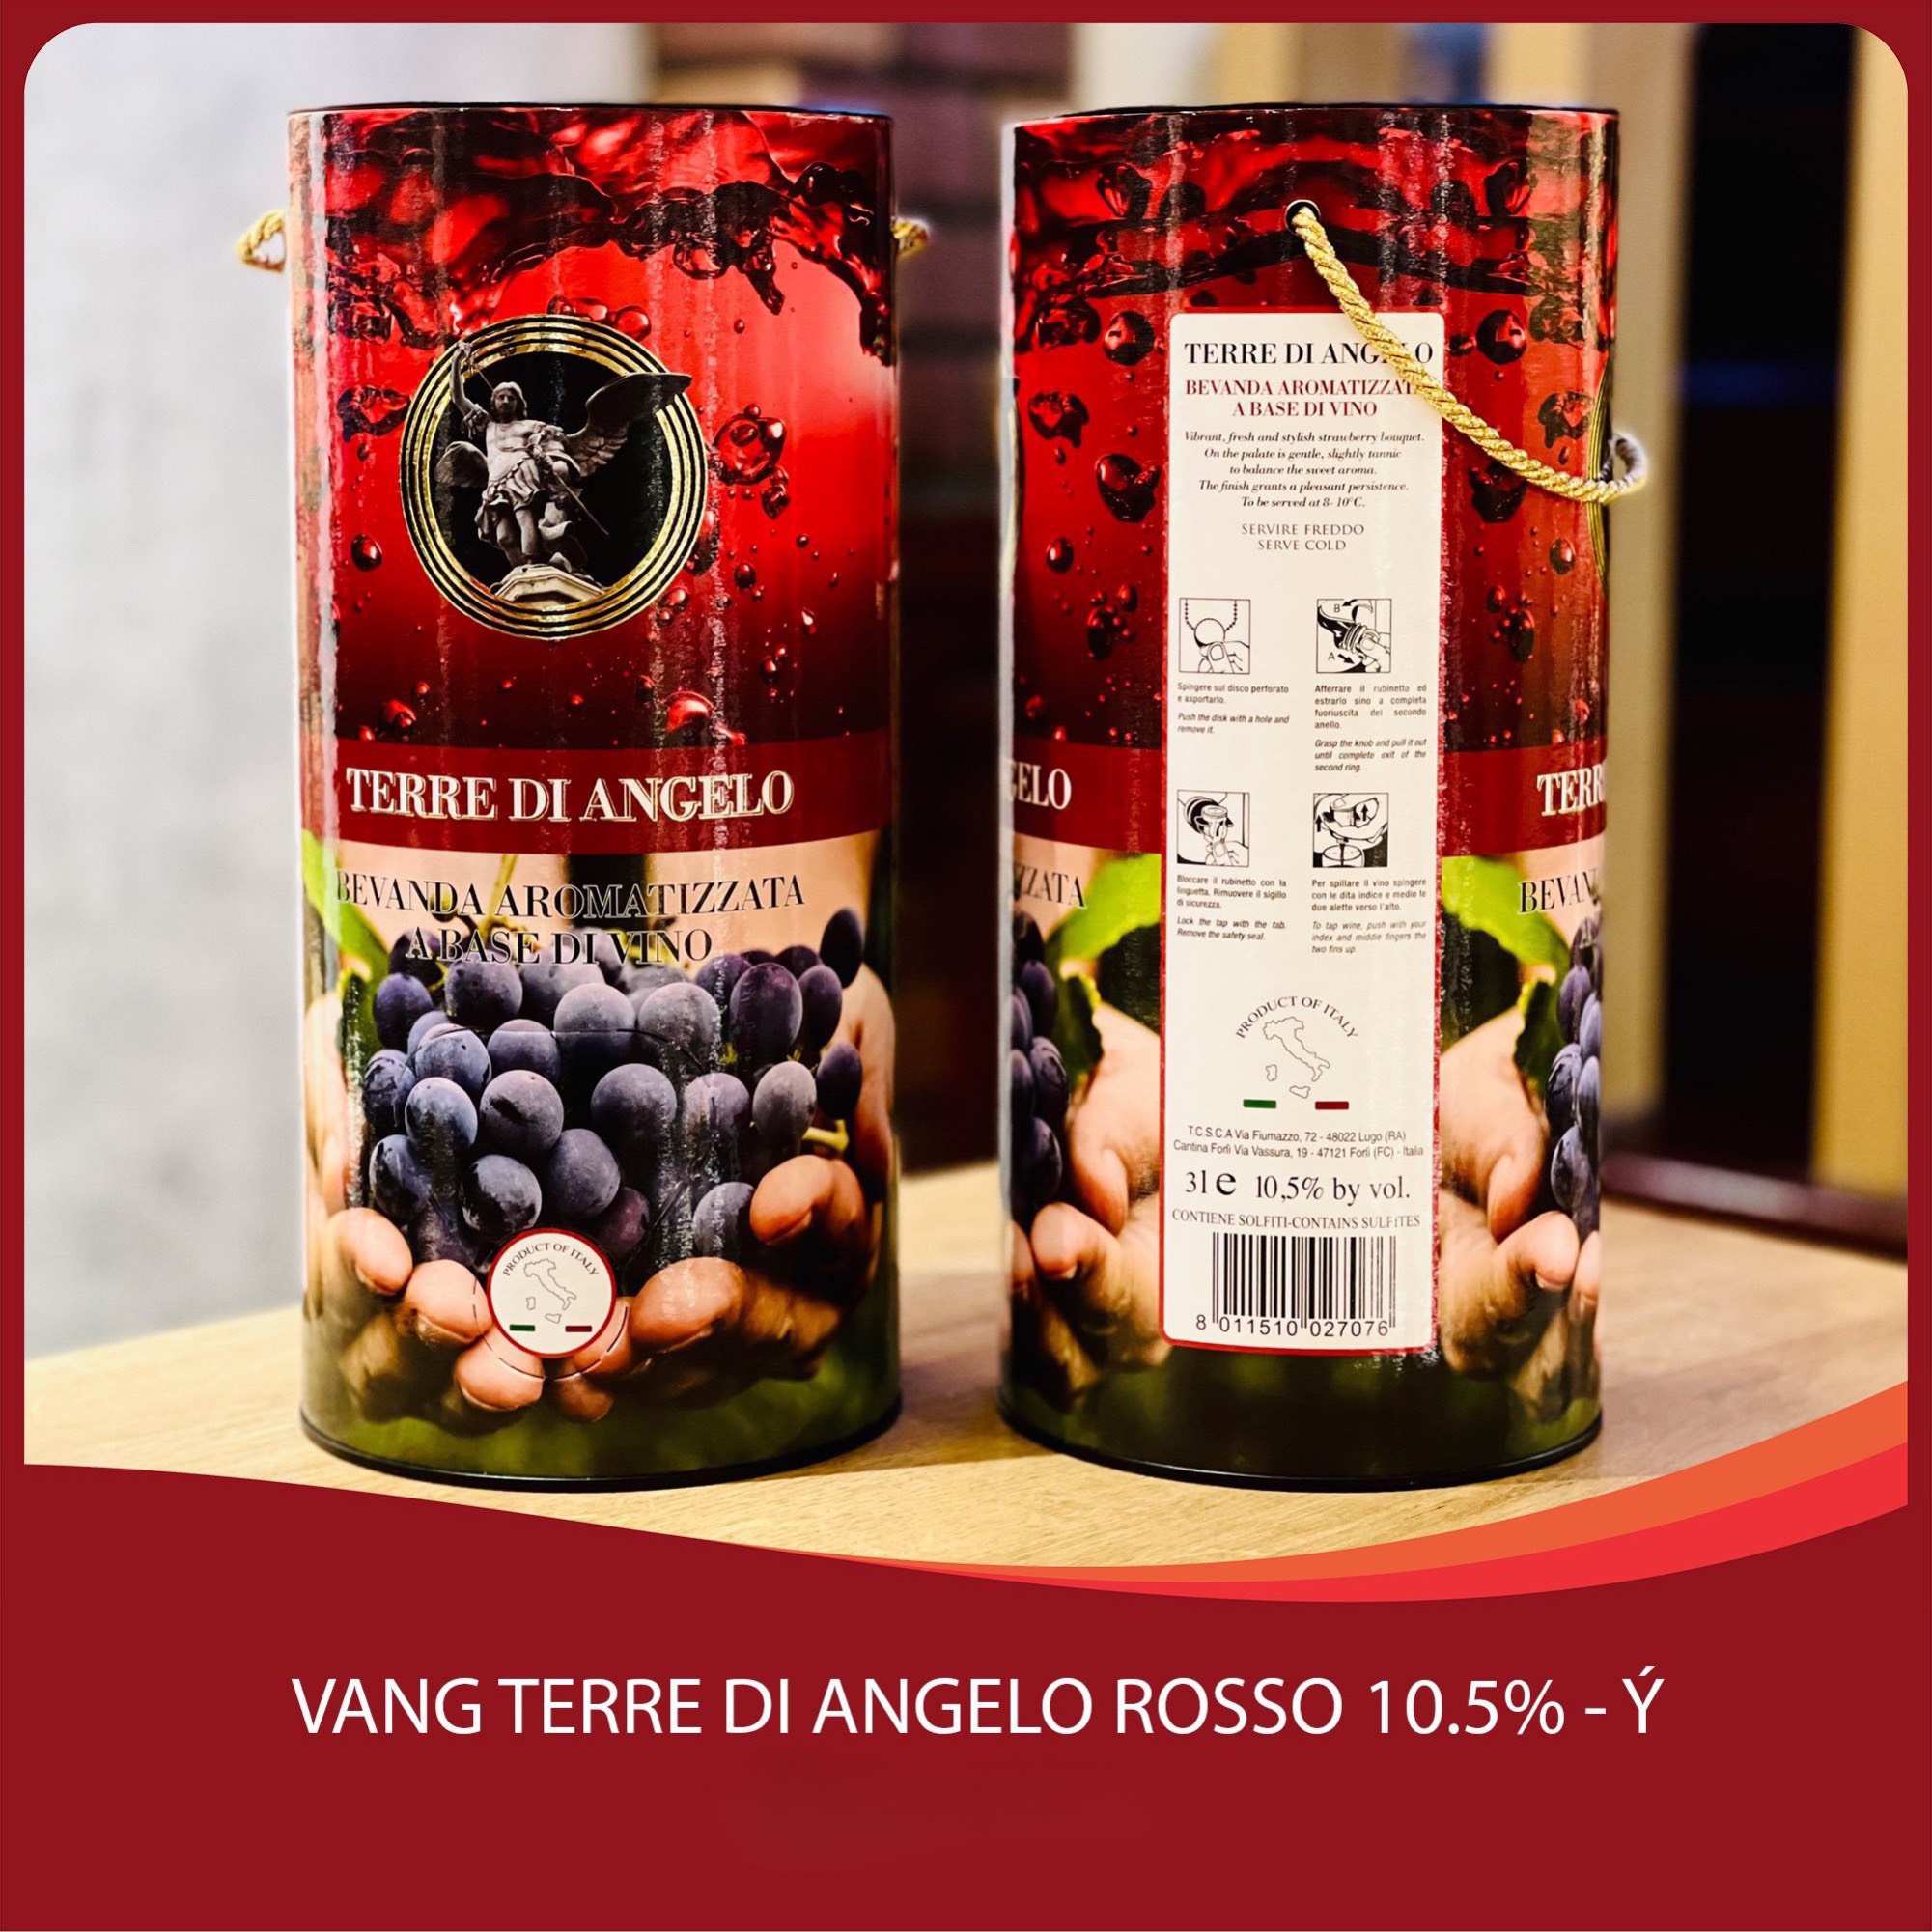 Vang bich Angelo Rosso 3lit.2